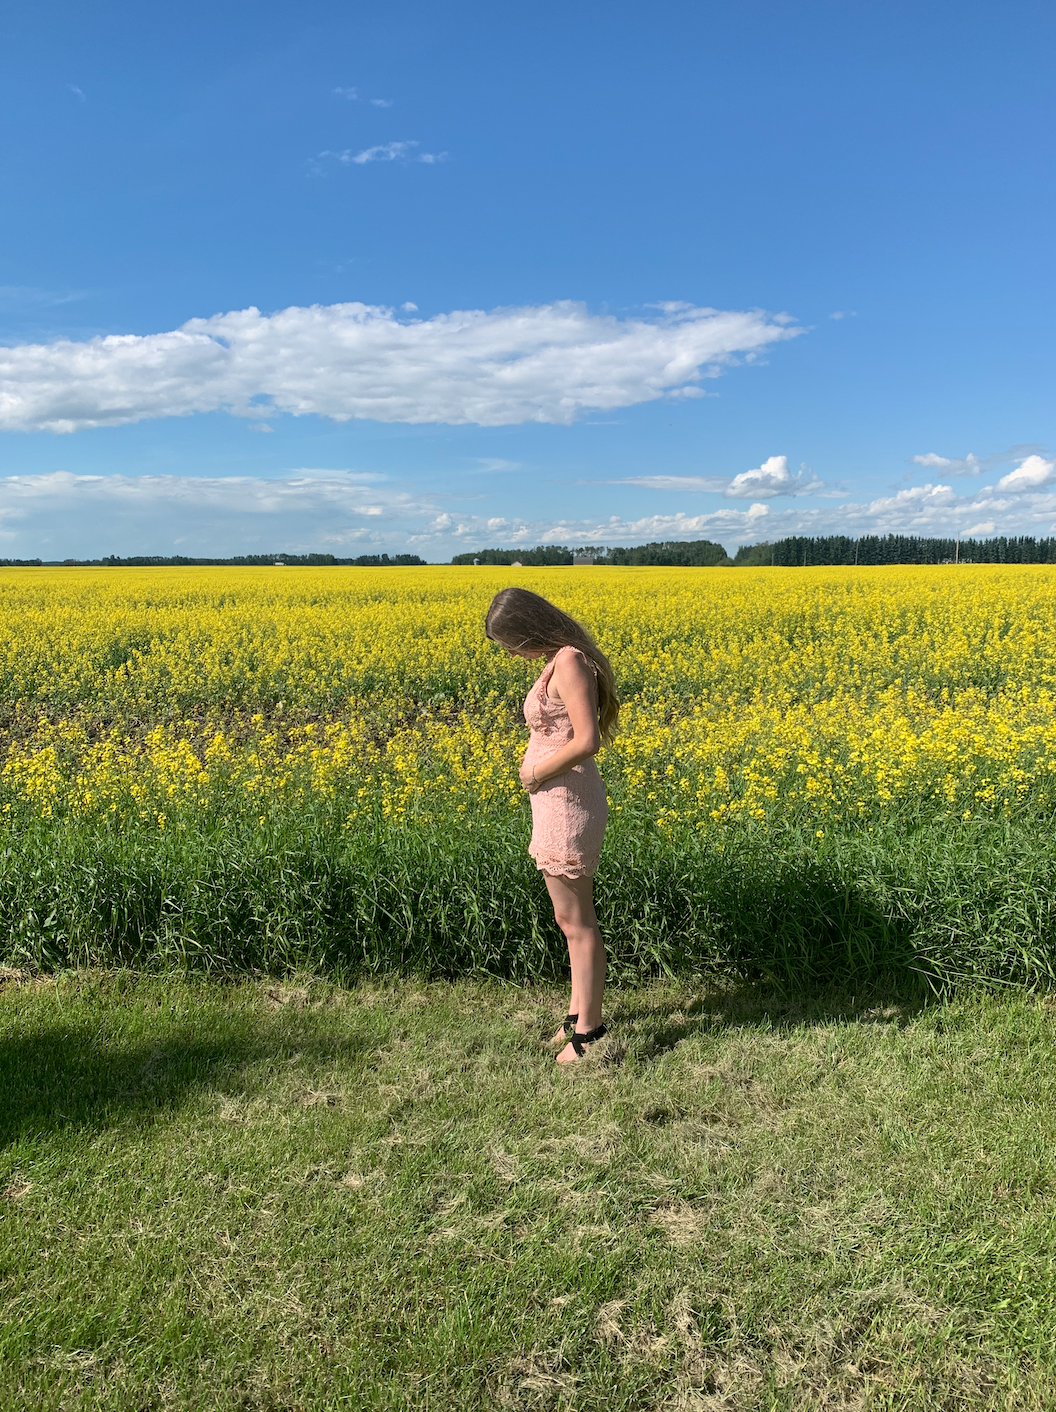 First Trimester photo standing in a field of flowers